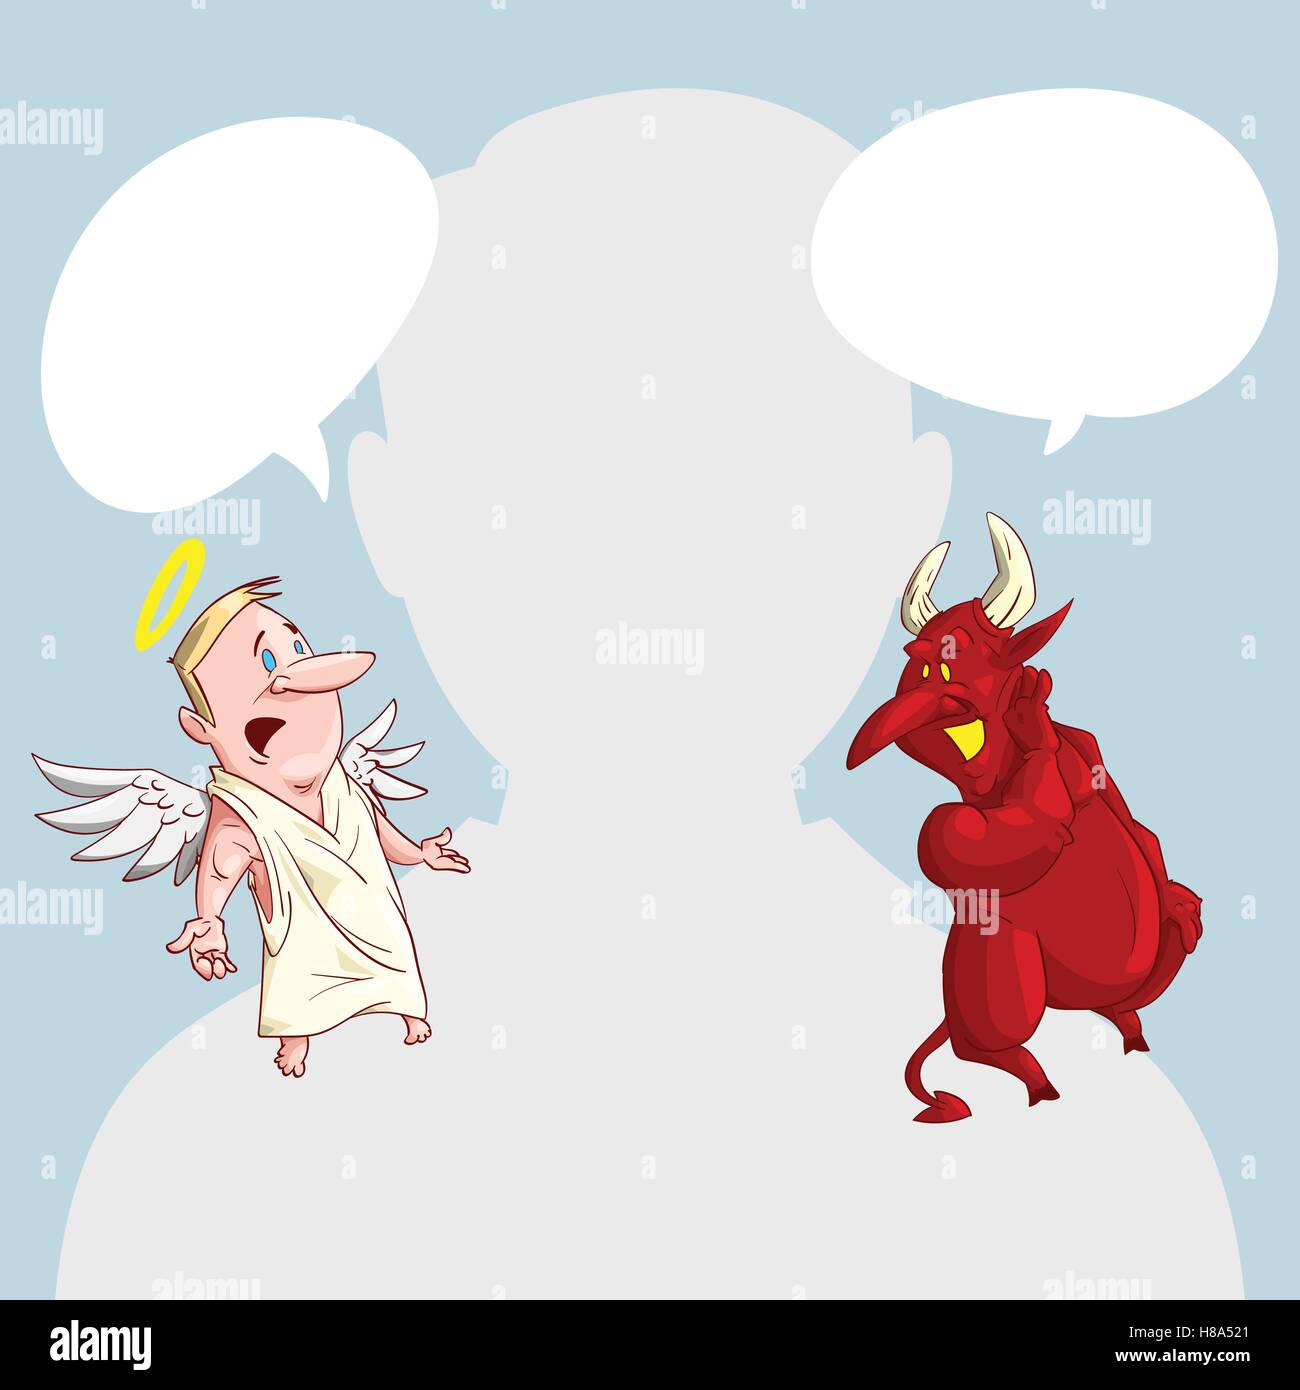 Blank male avatar or profile picture with angel and devil conscience characters on his shoulder advising him. Stock Vector